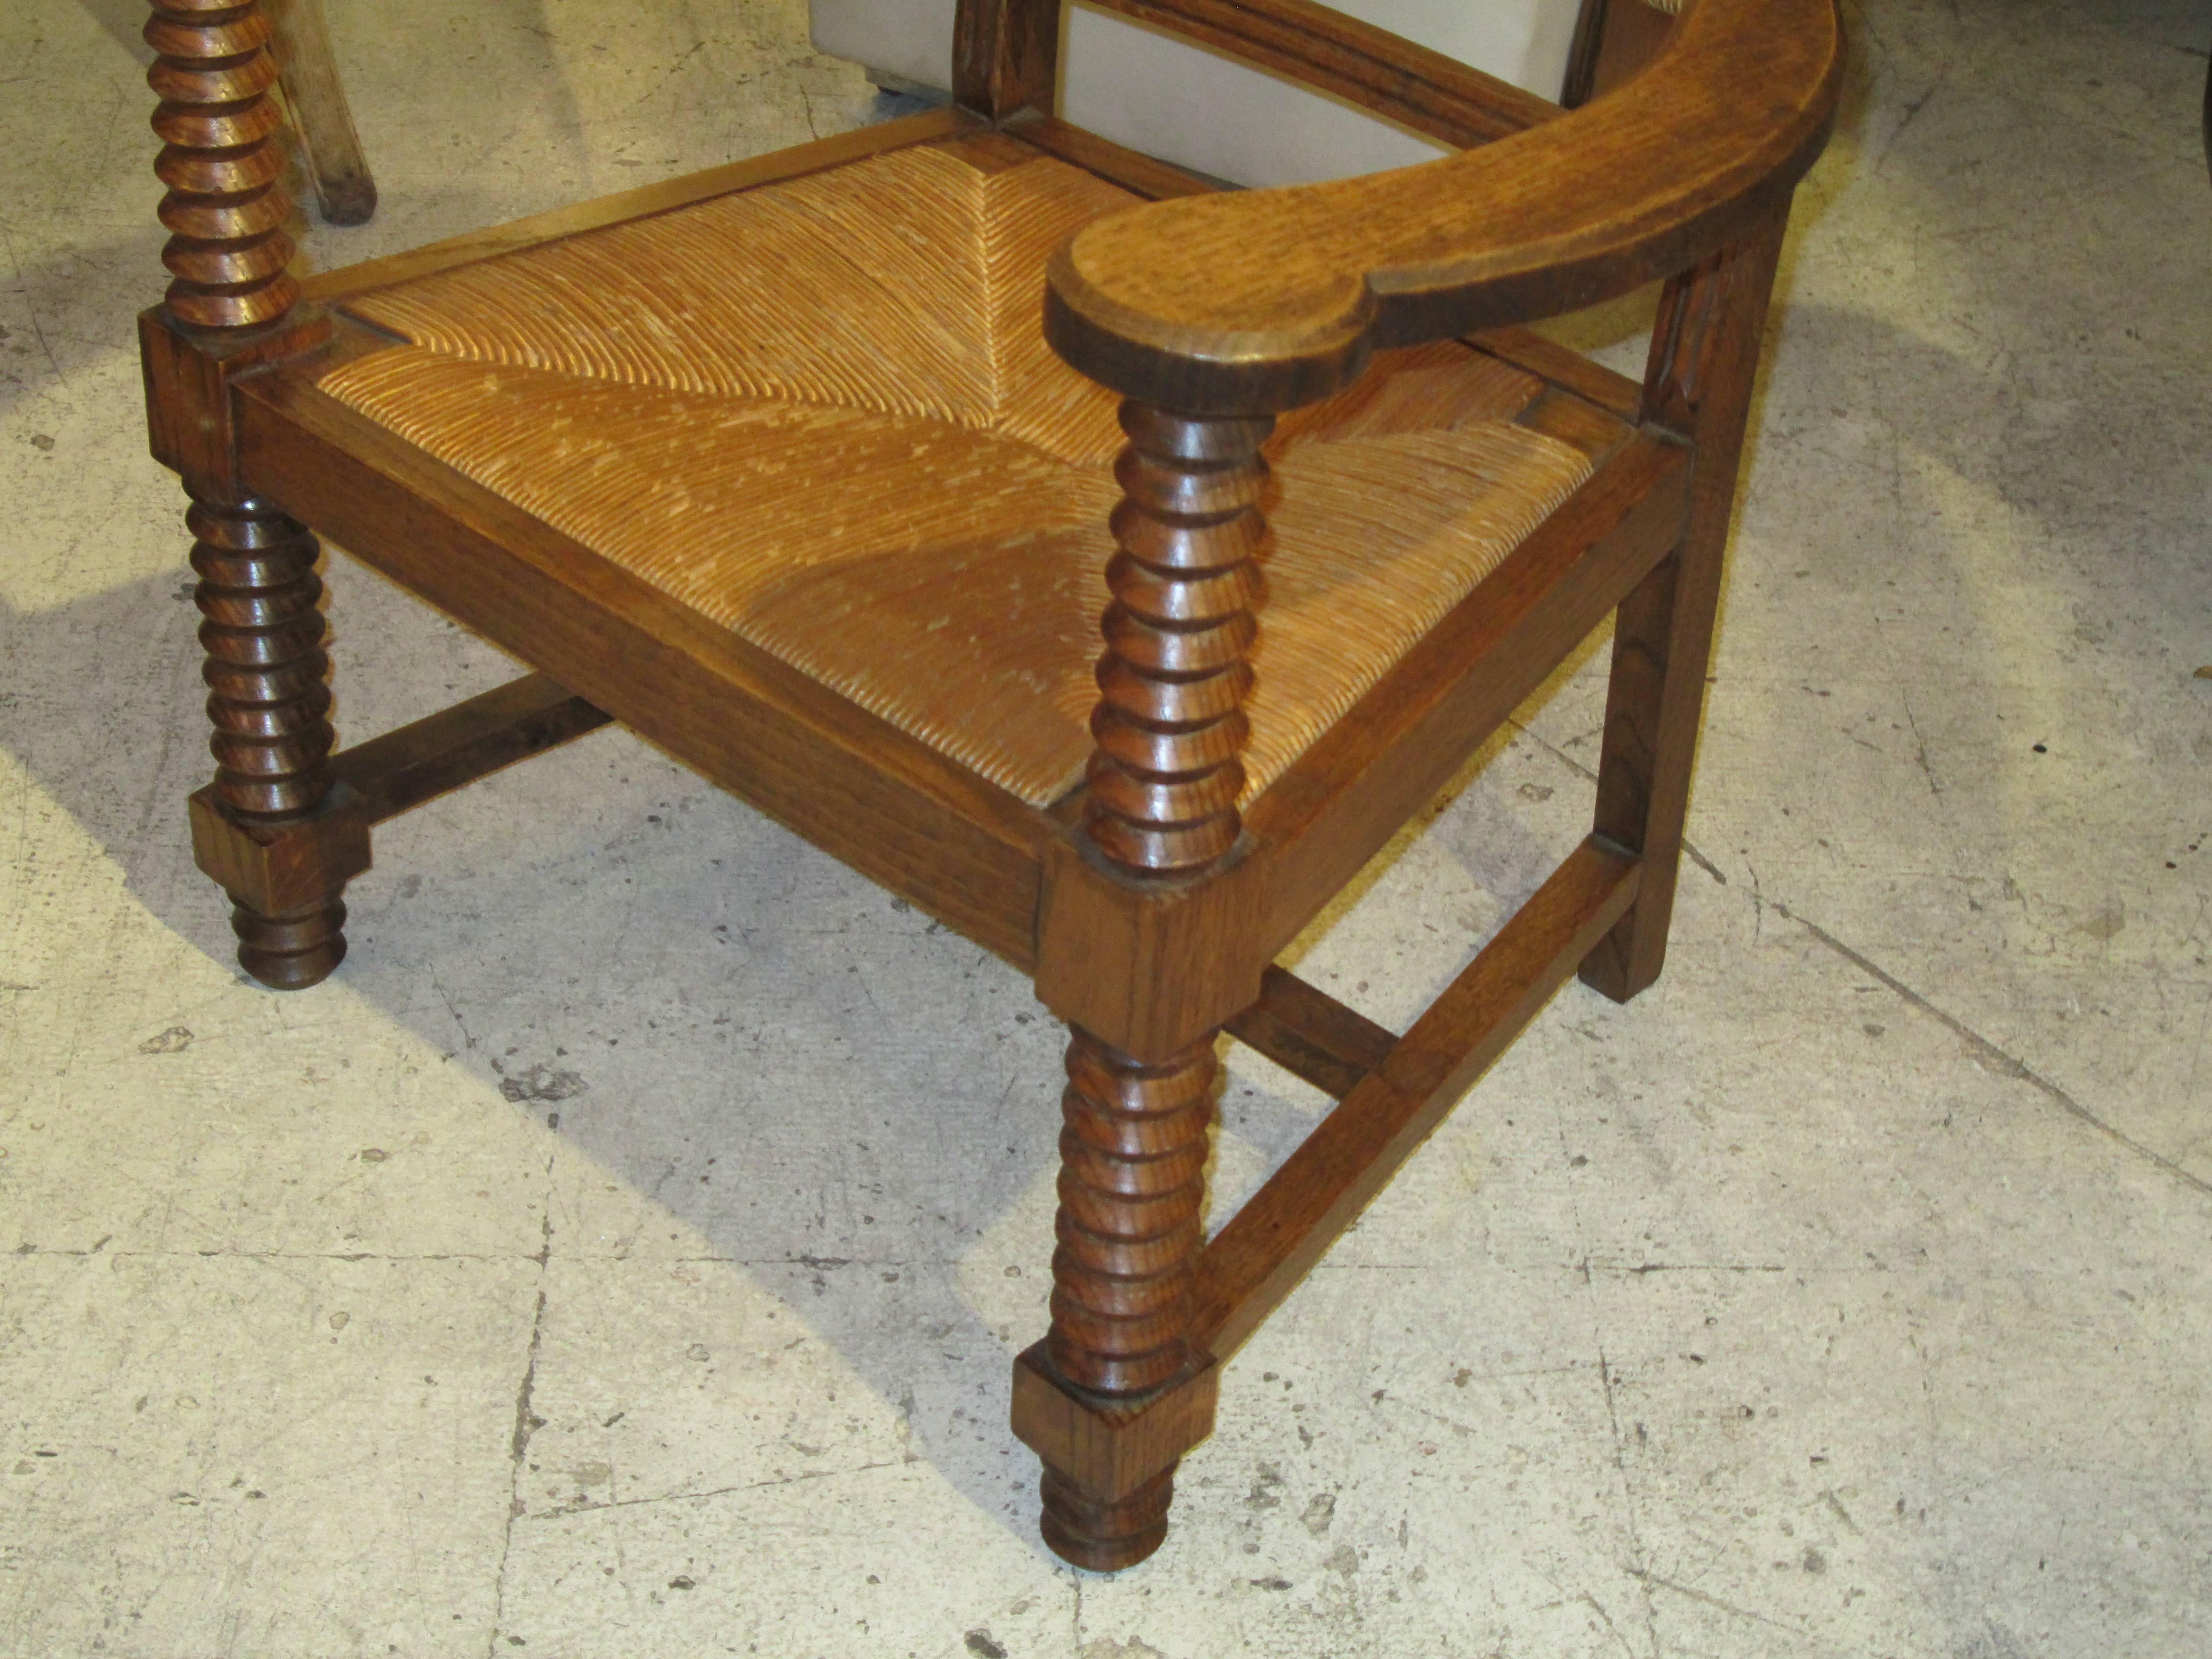 French Unusual Pair of Caned Oak Armchairs with Barley-Twist Arms and Legs